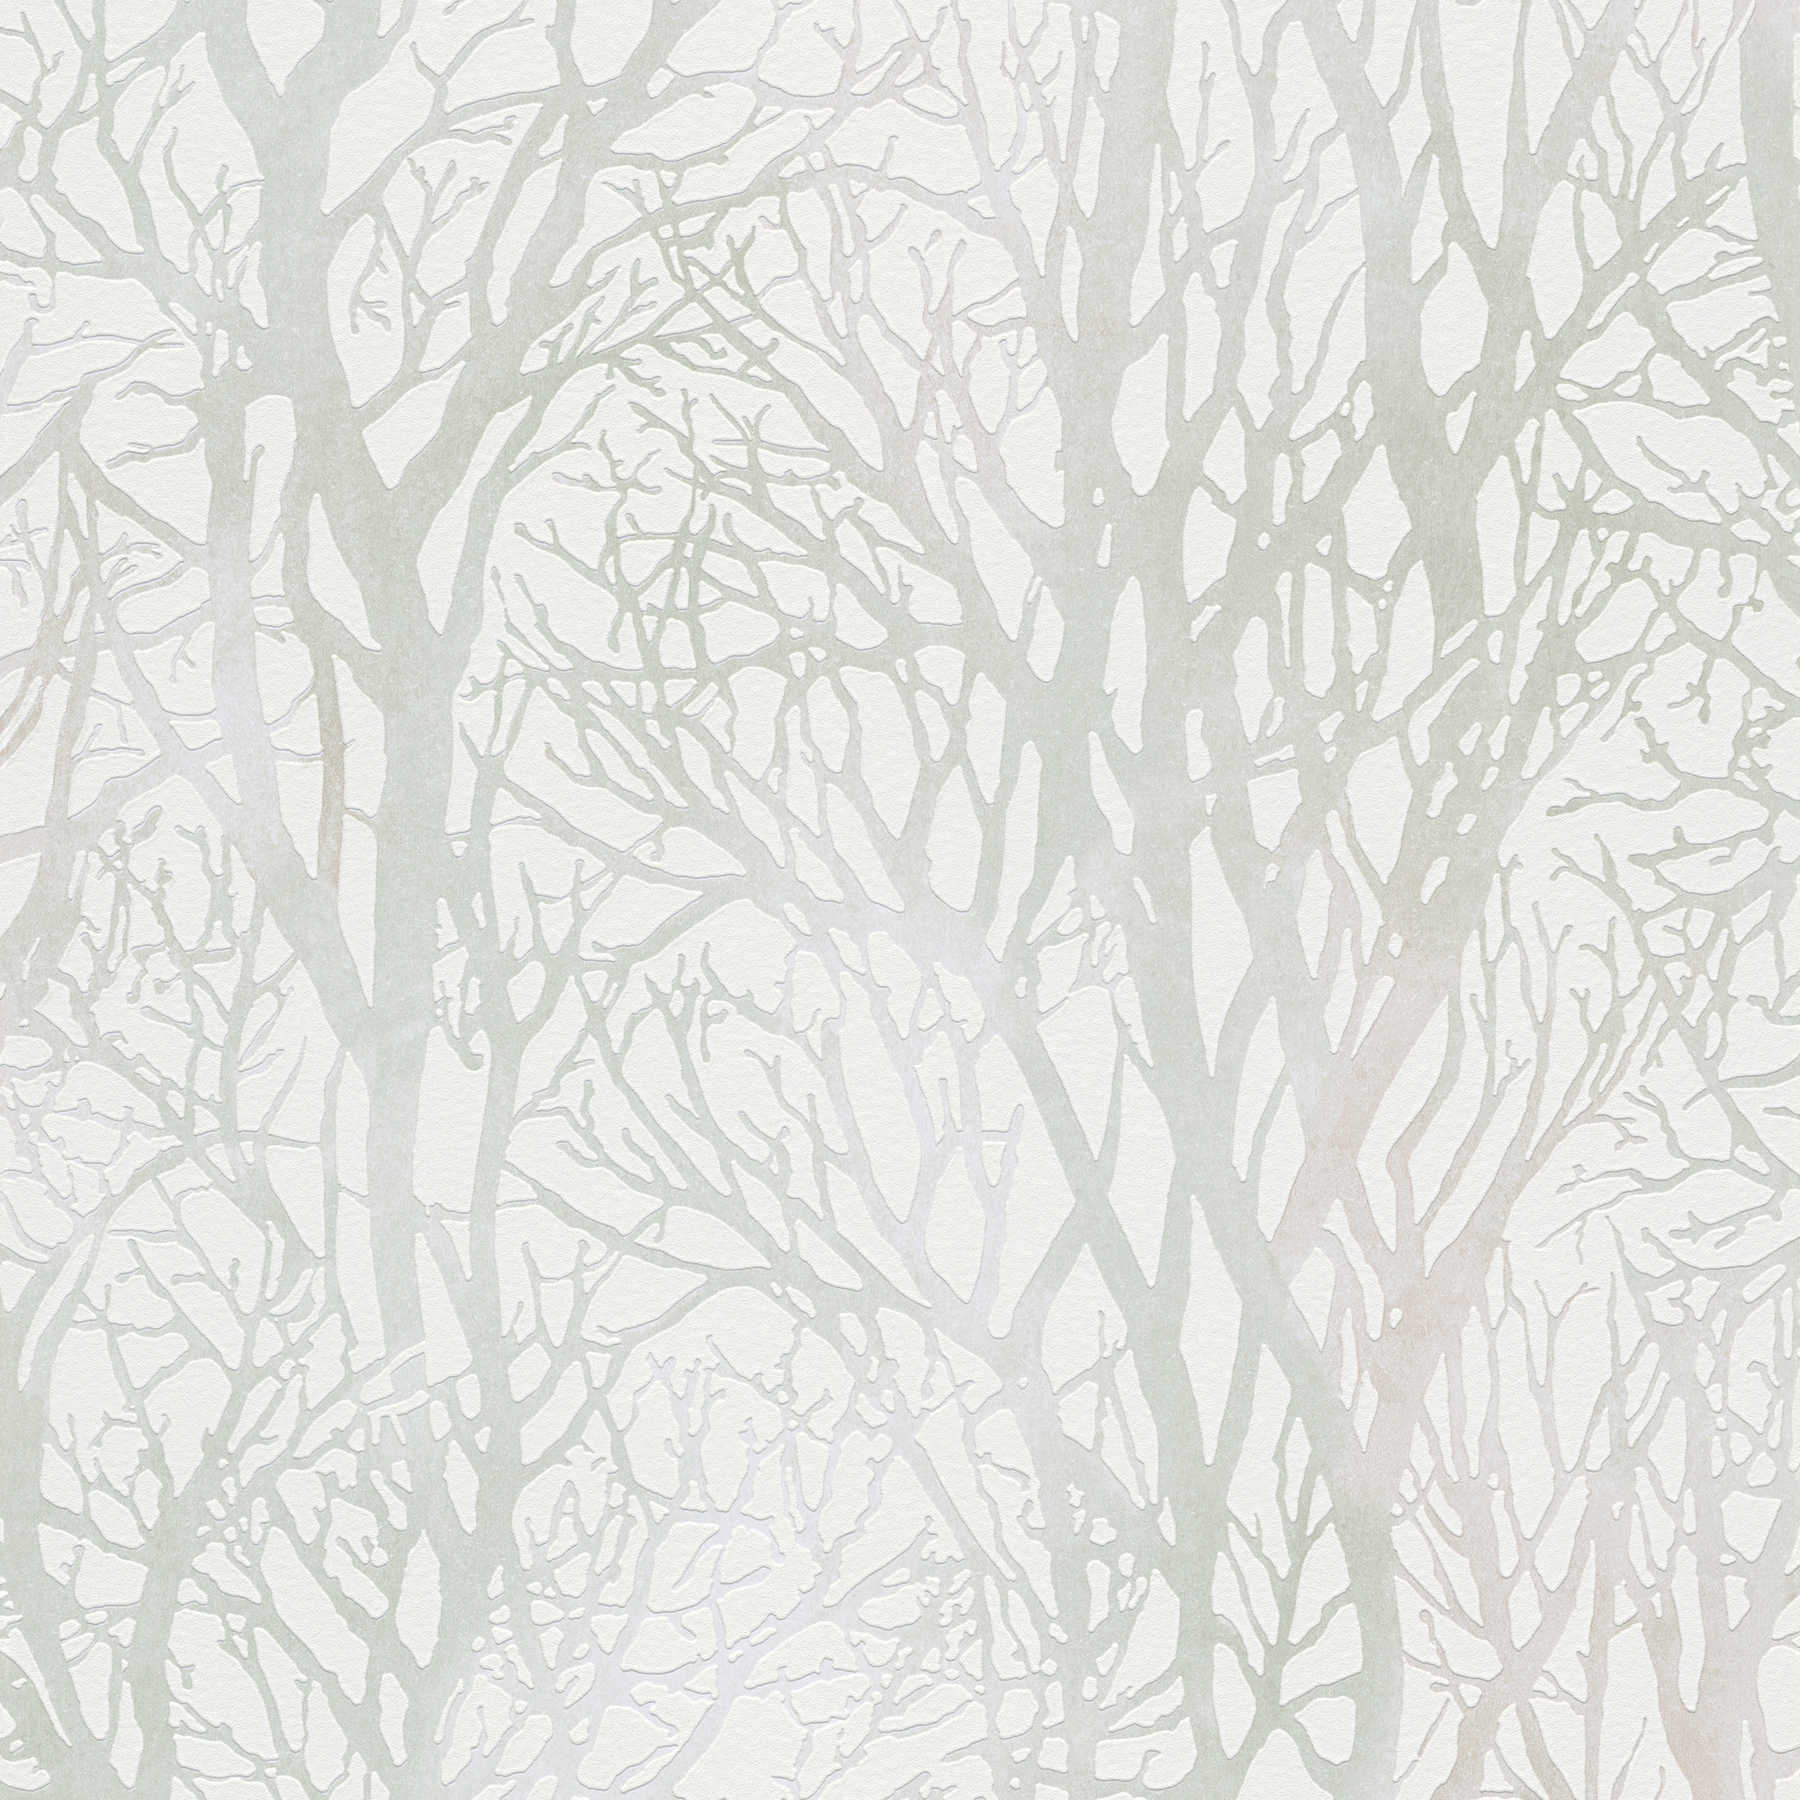 Silver grey wallpaper with tree motif and metallic effect - white, green, silver
